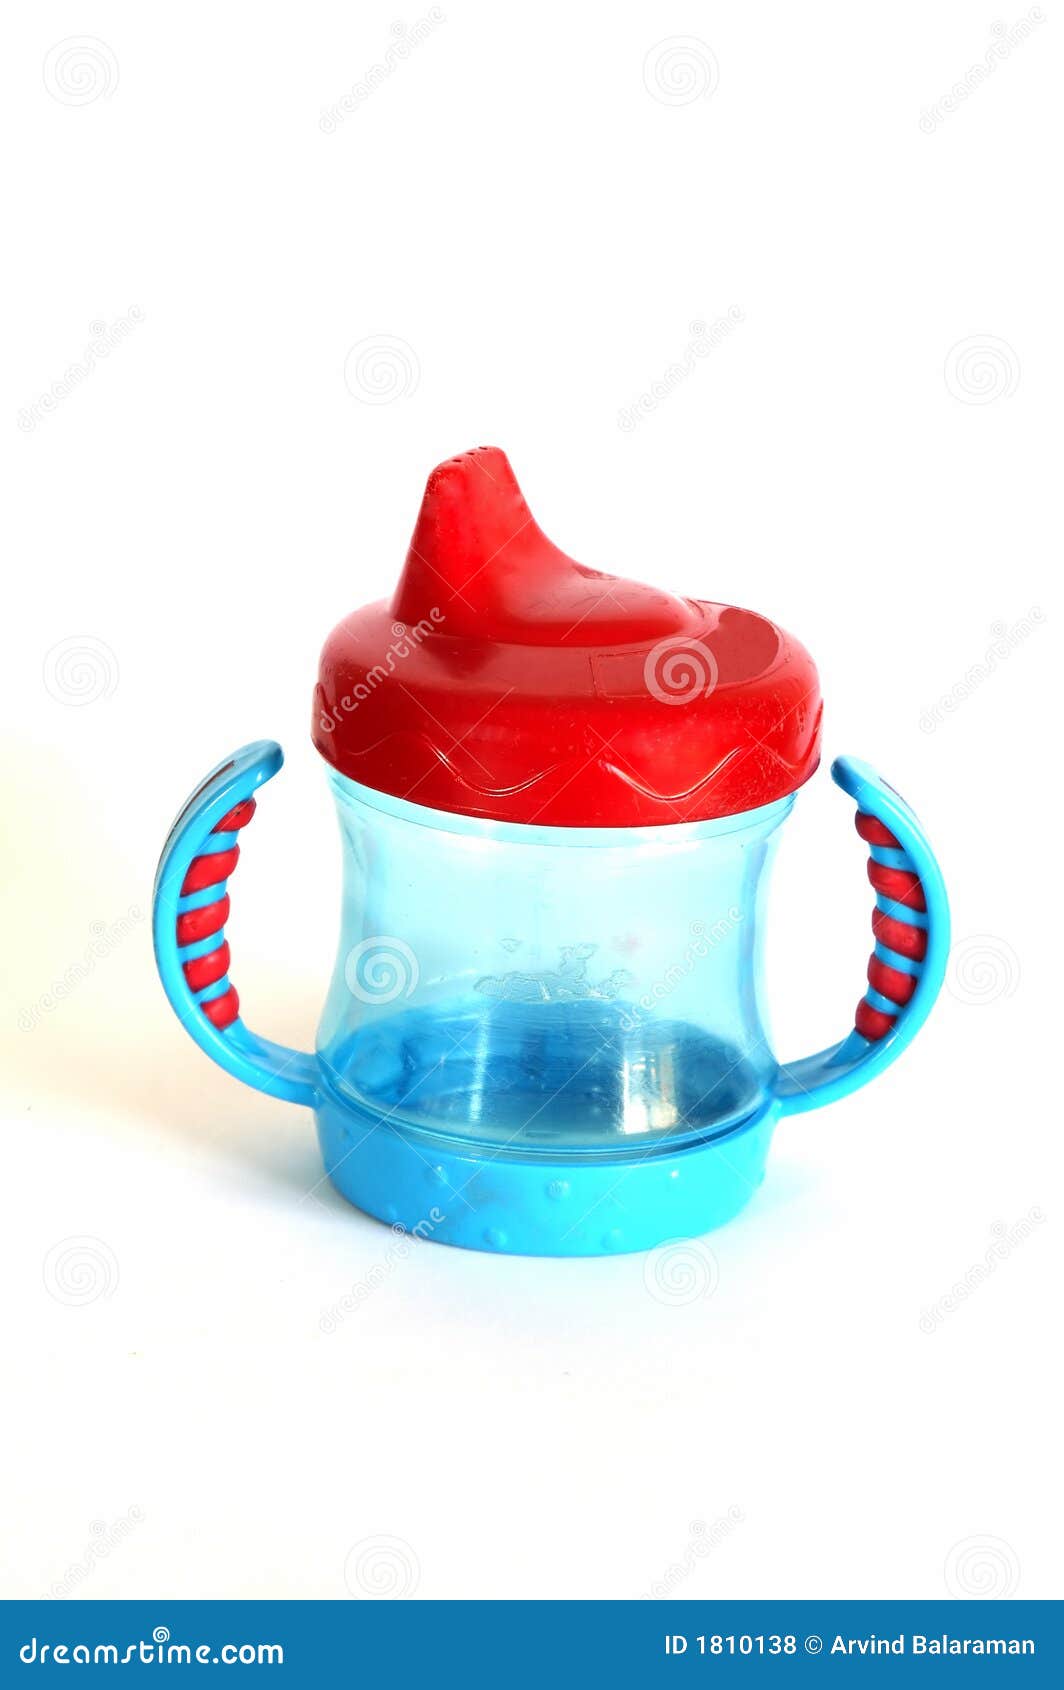 sippy cup clip art free - photo #44